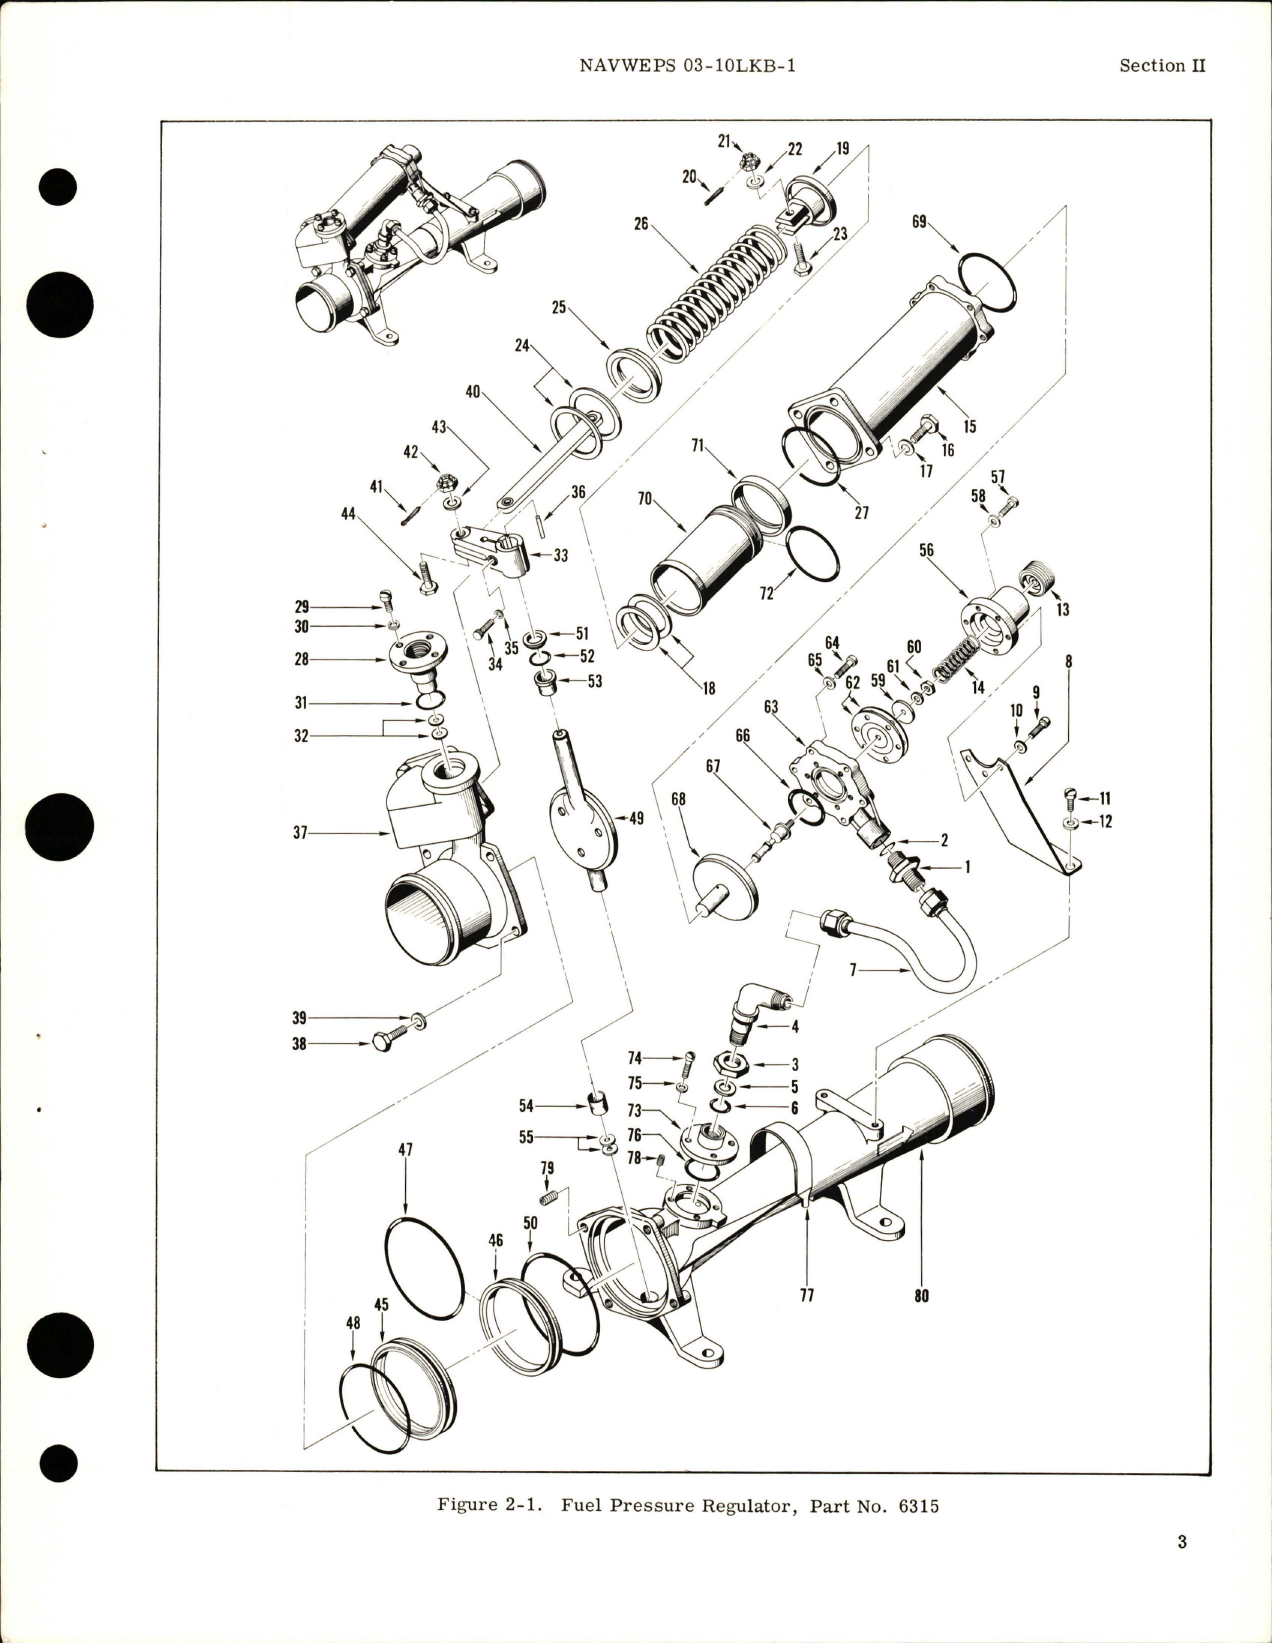 Sample page 7 from AirCorps Library document: Overhaul Instructions for Fuel Pressure Regulator - Part 6315